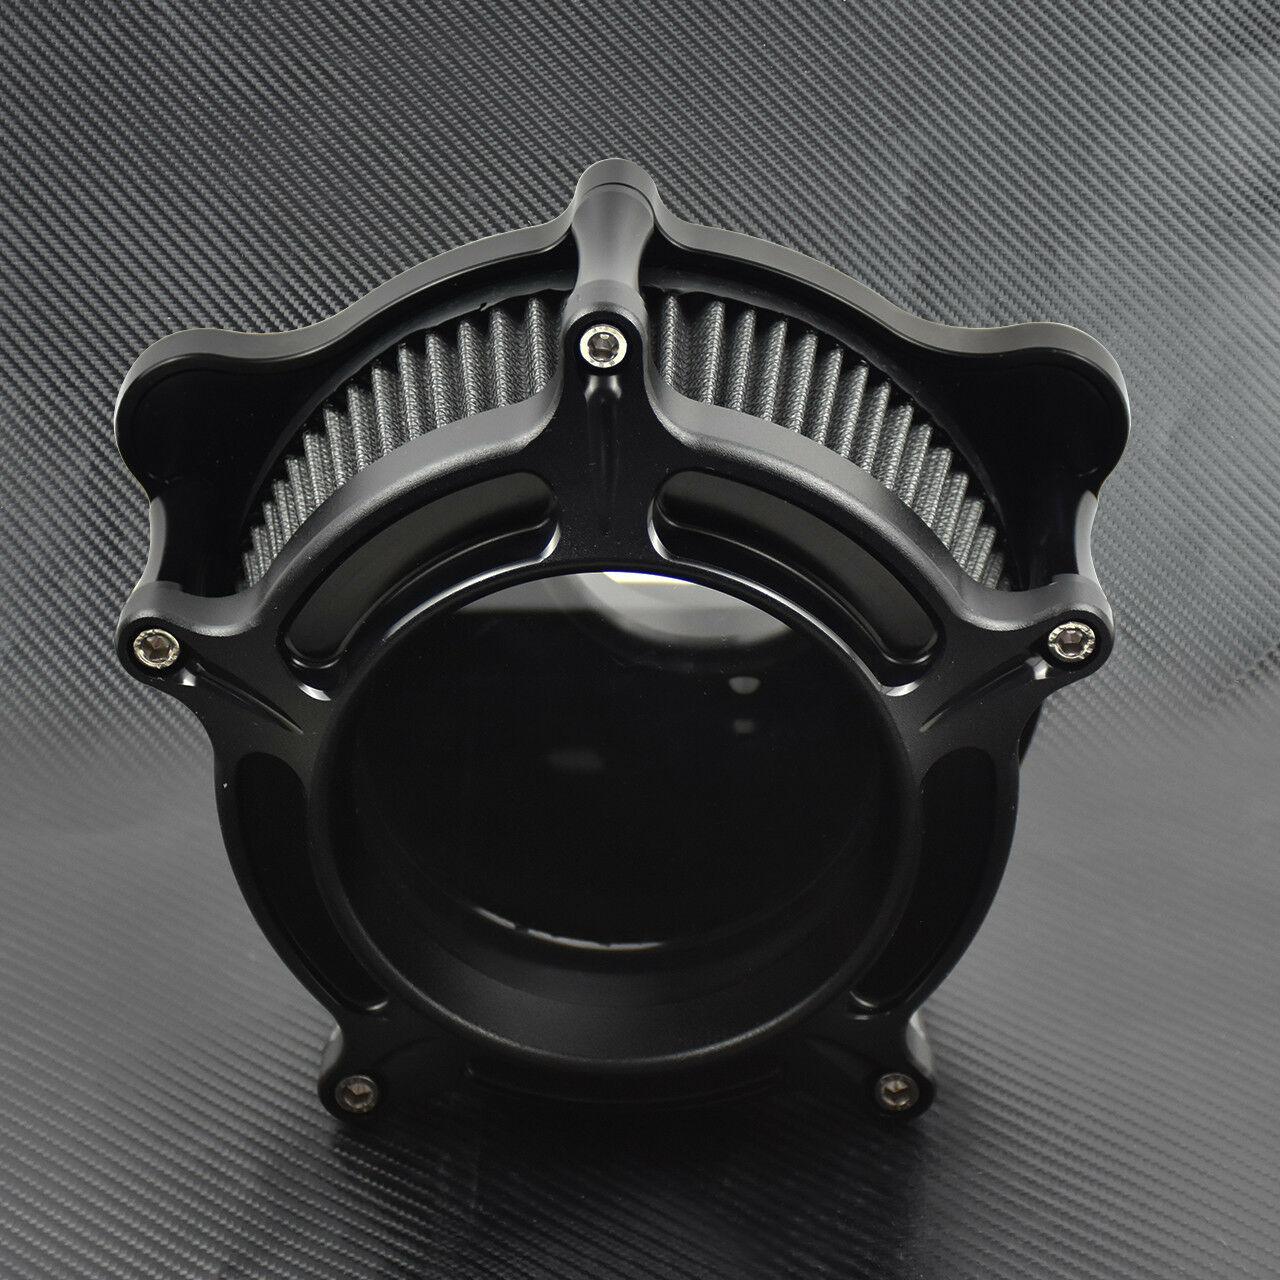 Clear Matte Black Air Cleaner Grey Filter Fit For Harley Touring 217-19 Softail - Moto Life Products